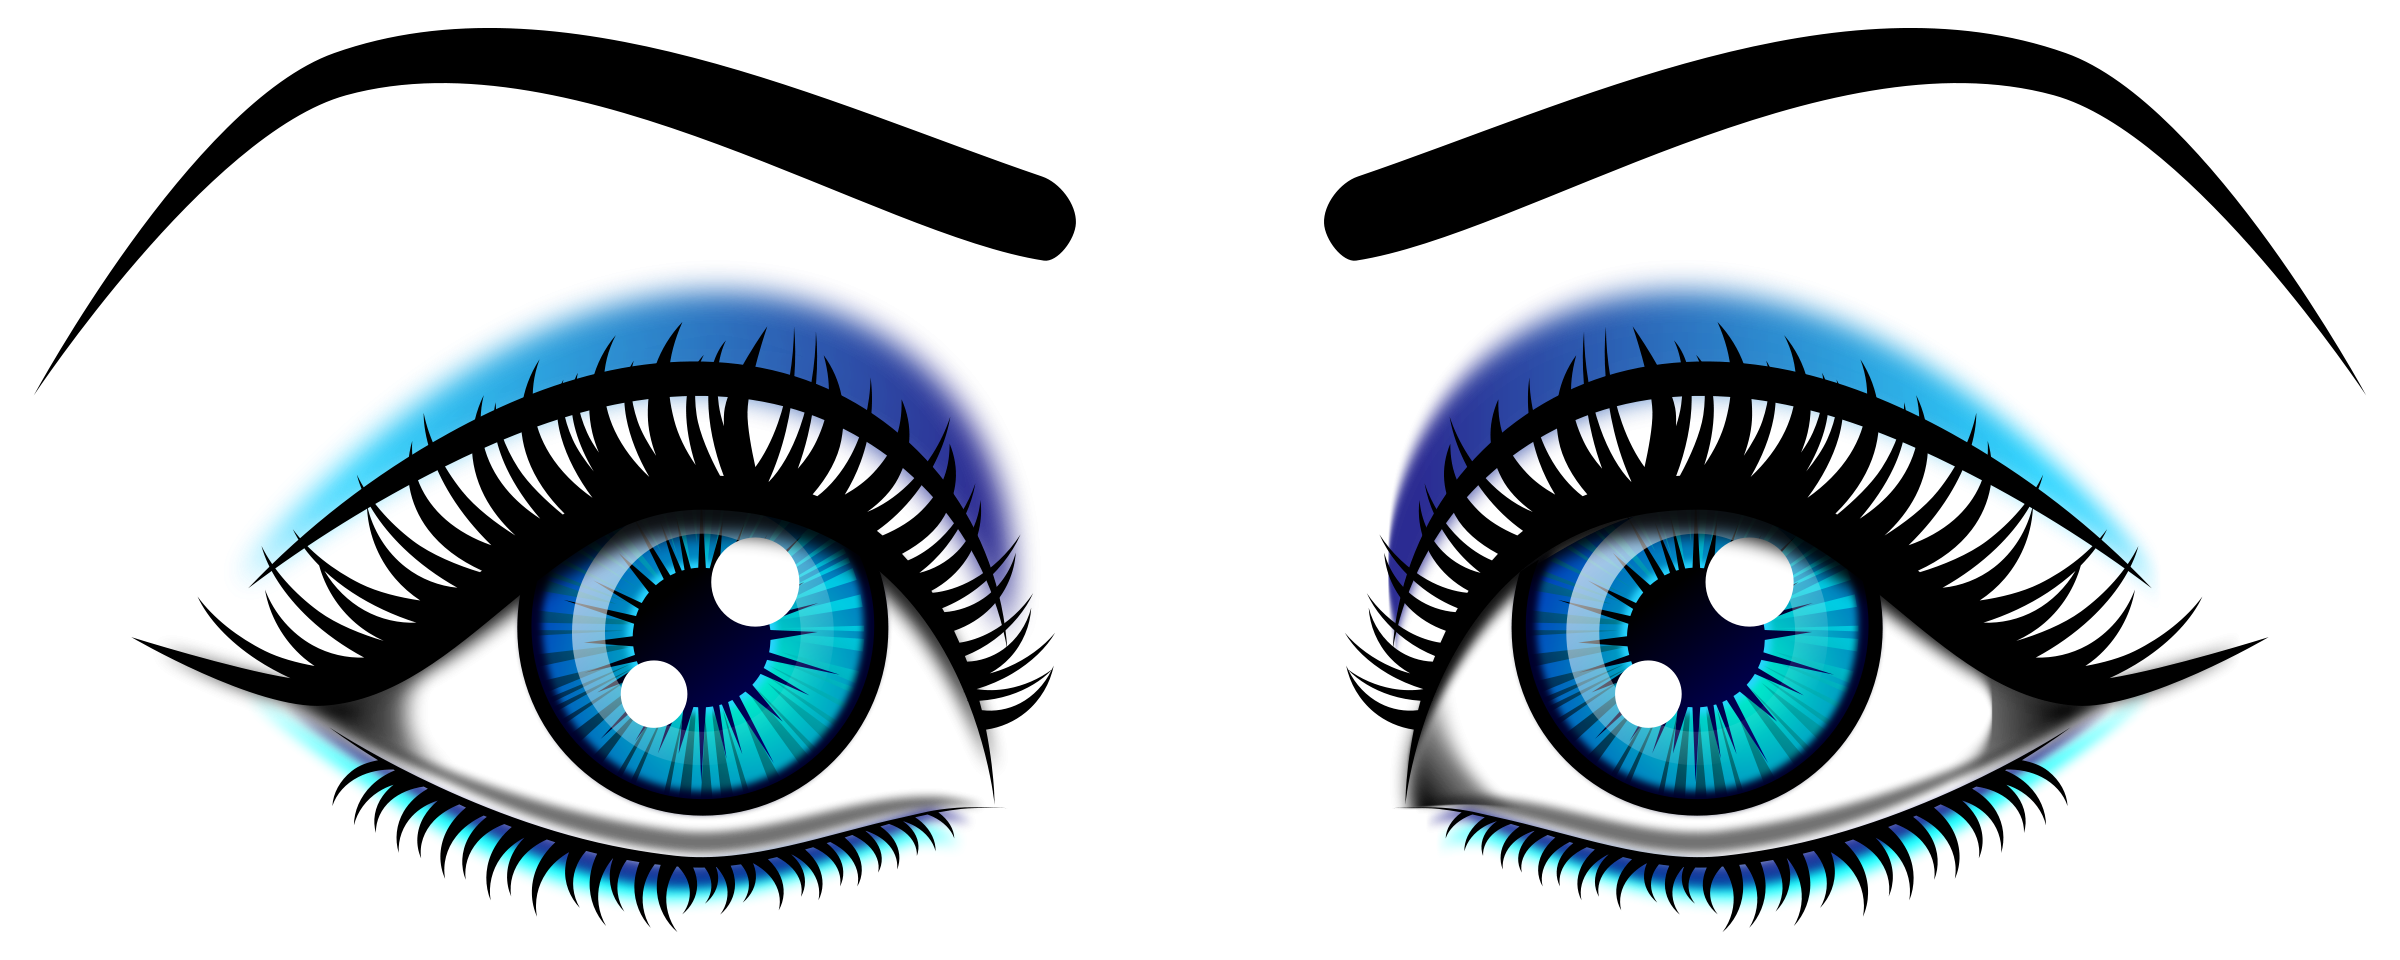 Eye pictures clip art - Clipa